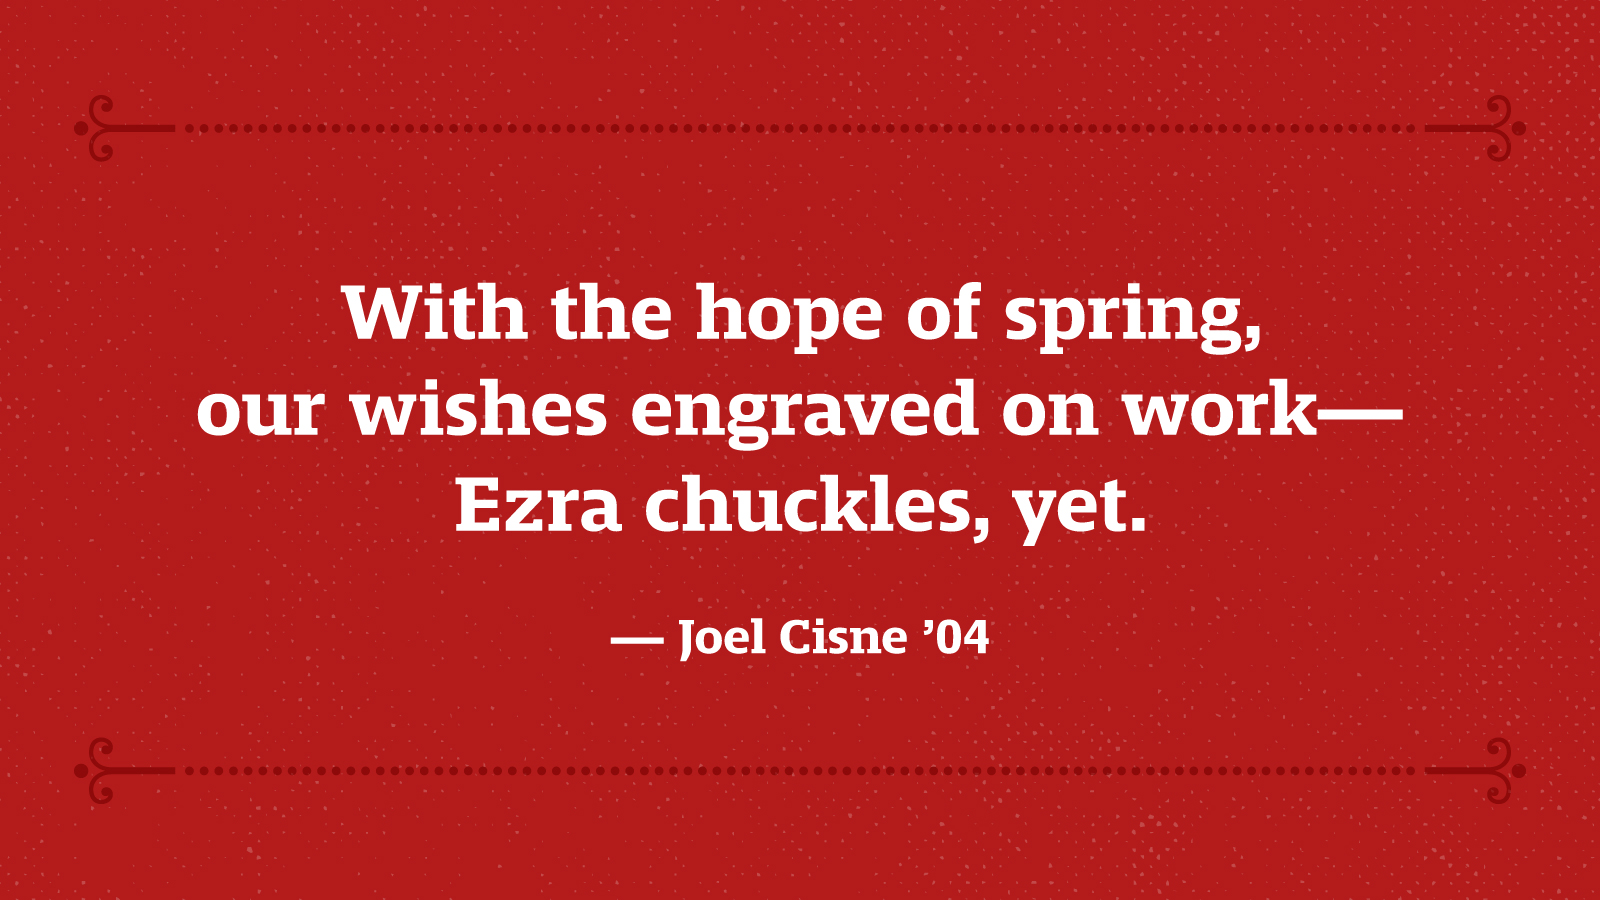 With the hope of spring, our wishes engraved on work – Ezra chuckles, yet. — Joel Cisne ’04